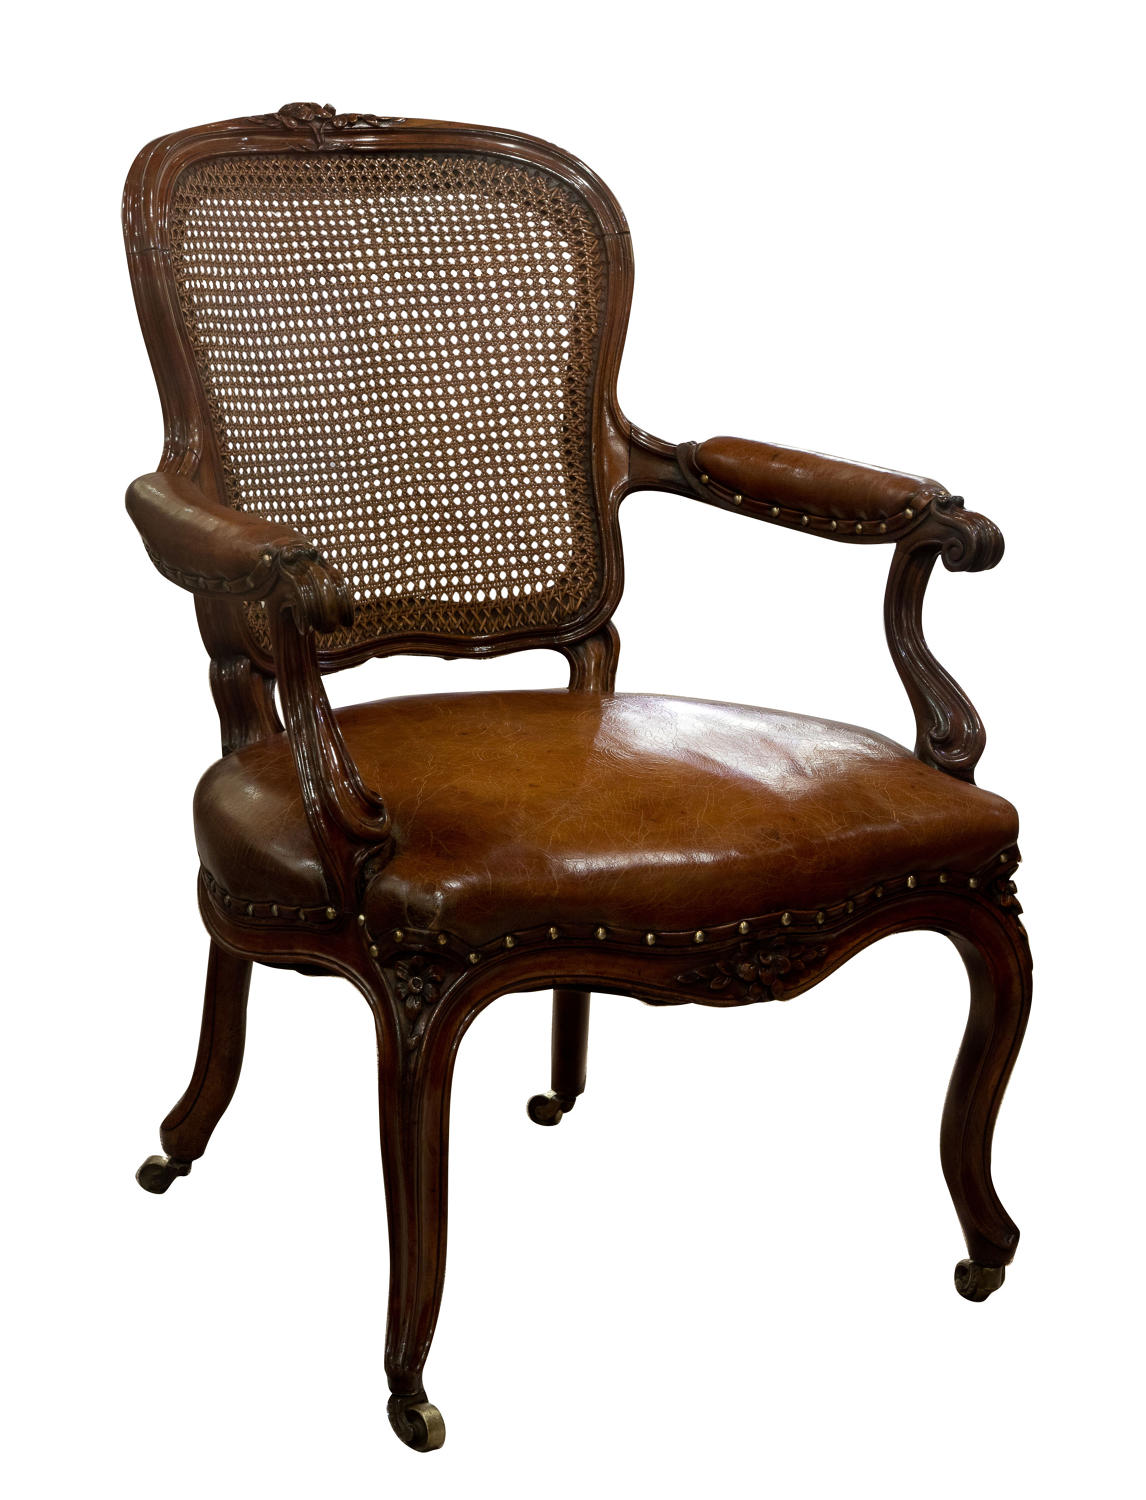 Early 19th century carved walnut arm chair